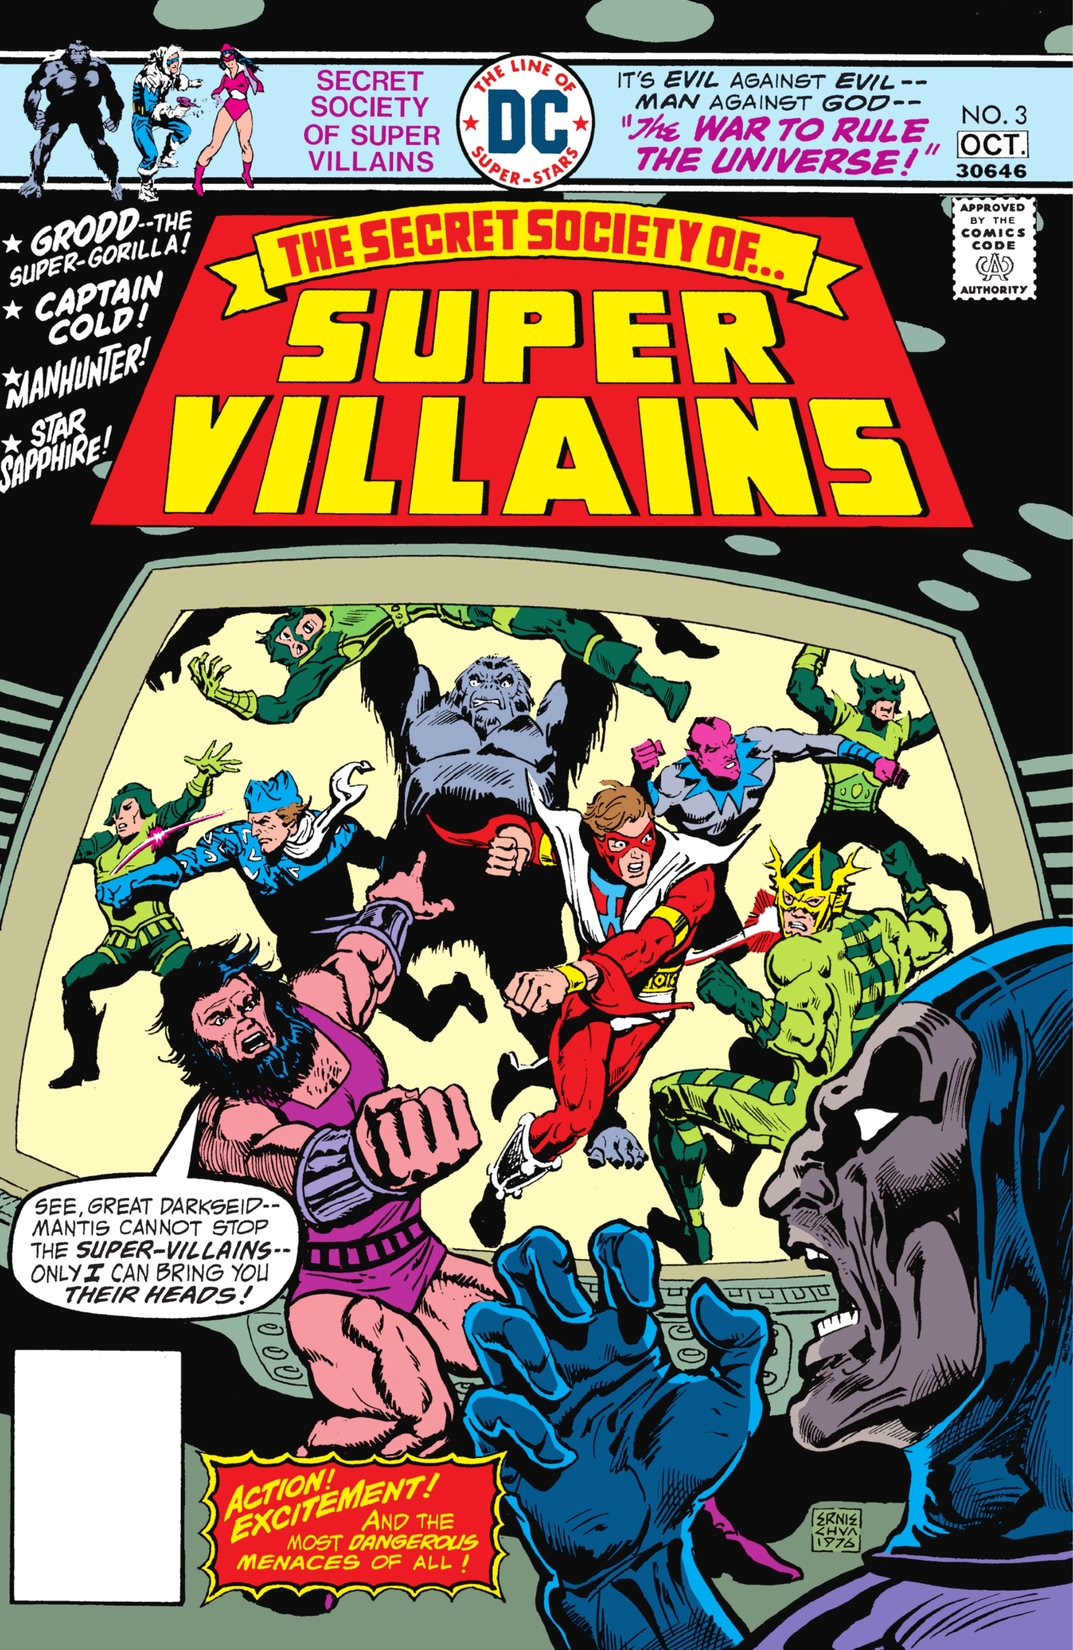 The Secret Society of Super-Villains #3 preview images